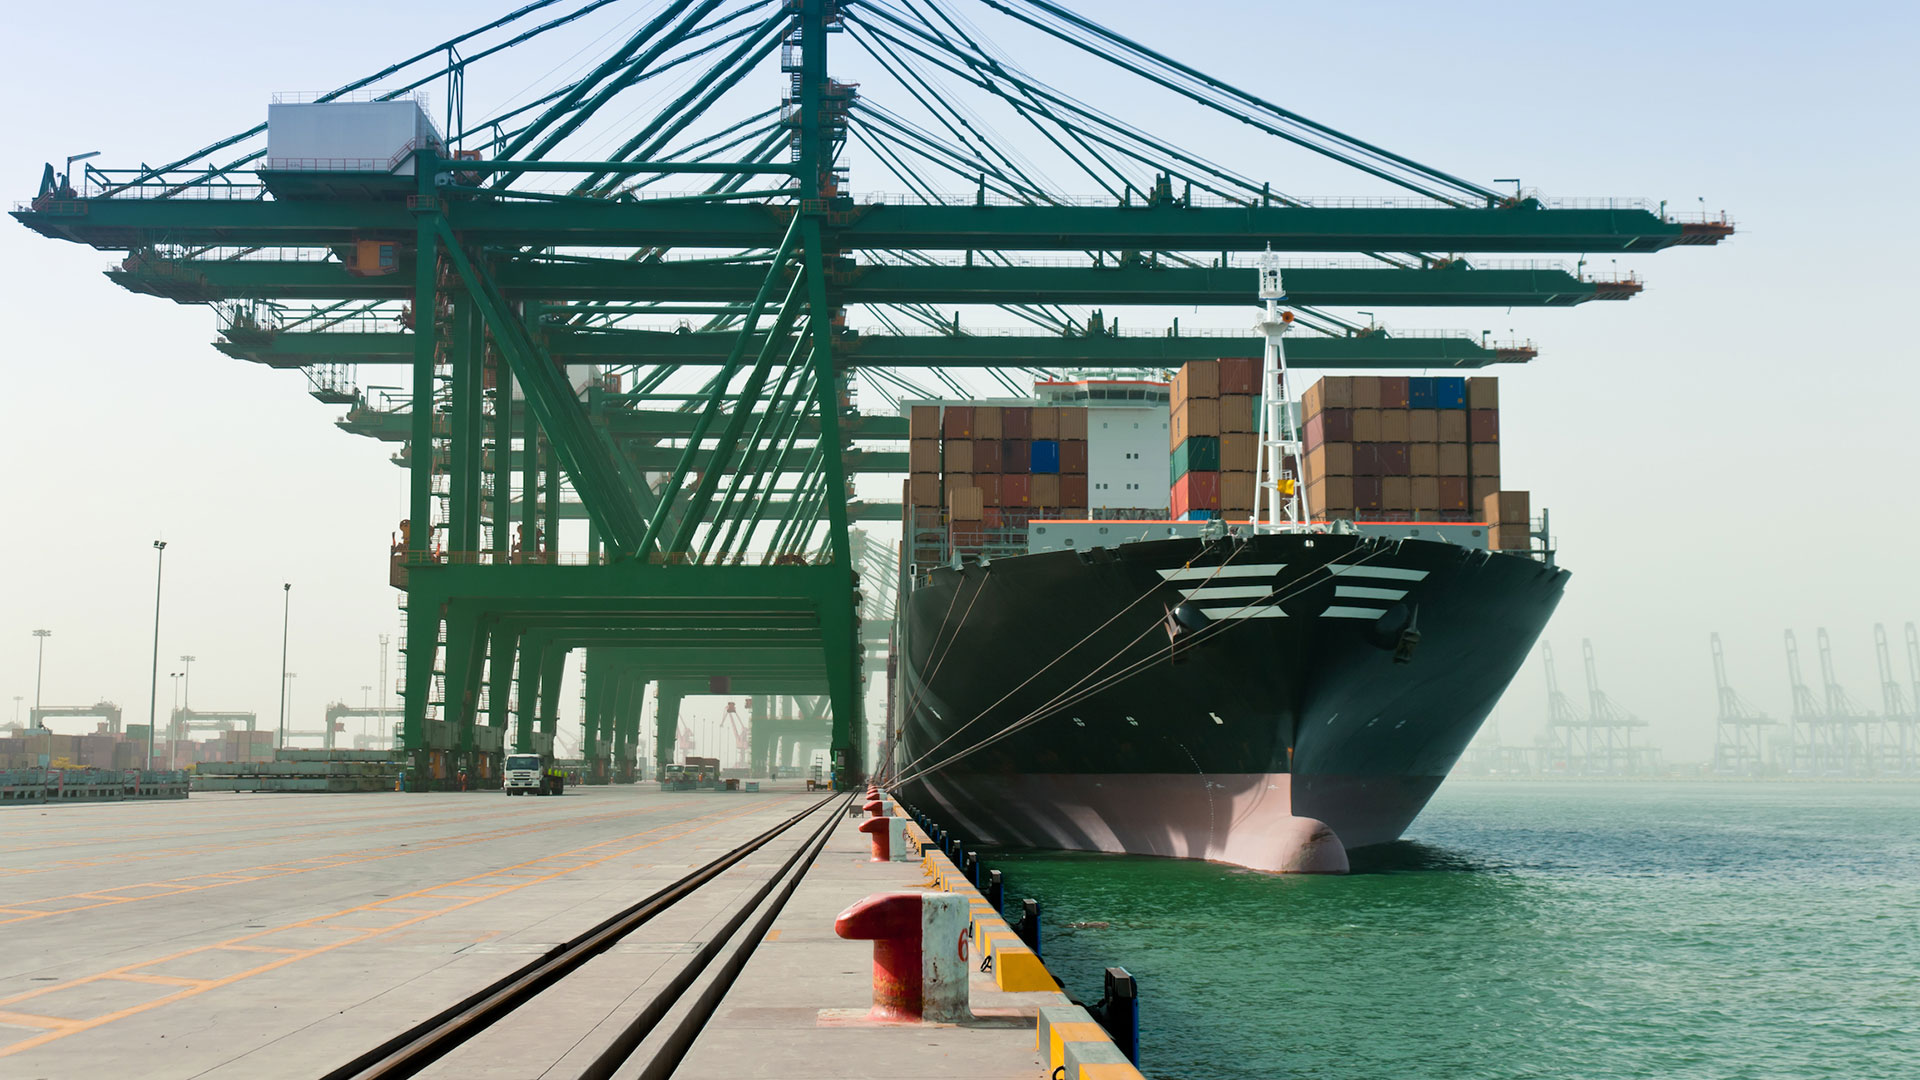 Greening the shipping industry